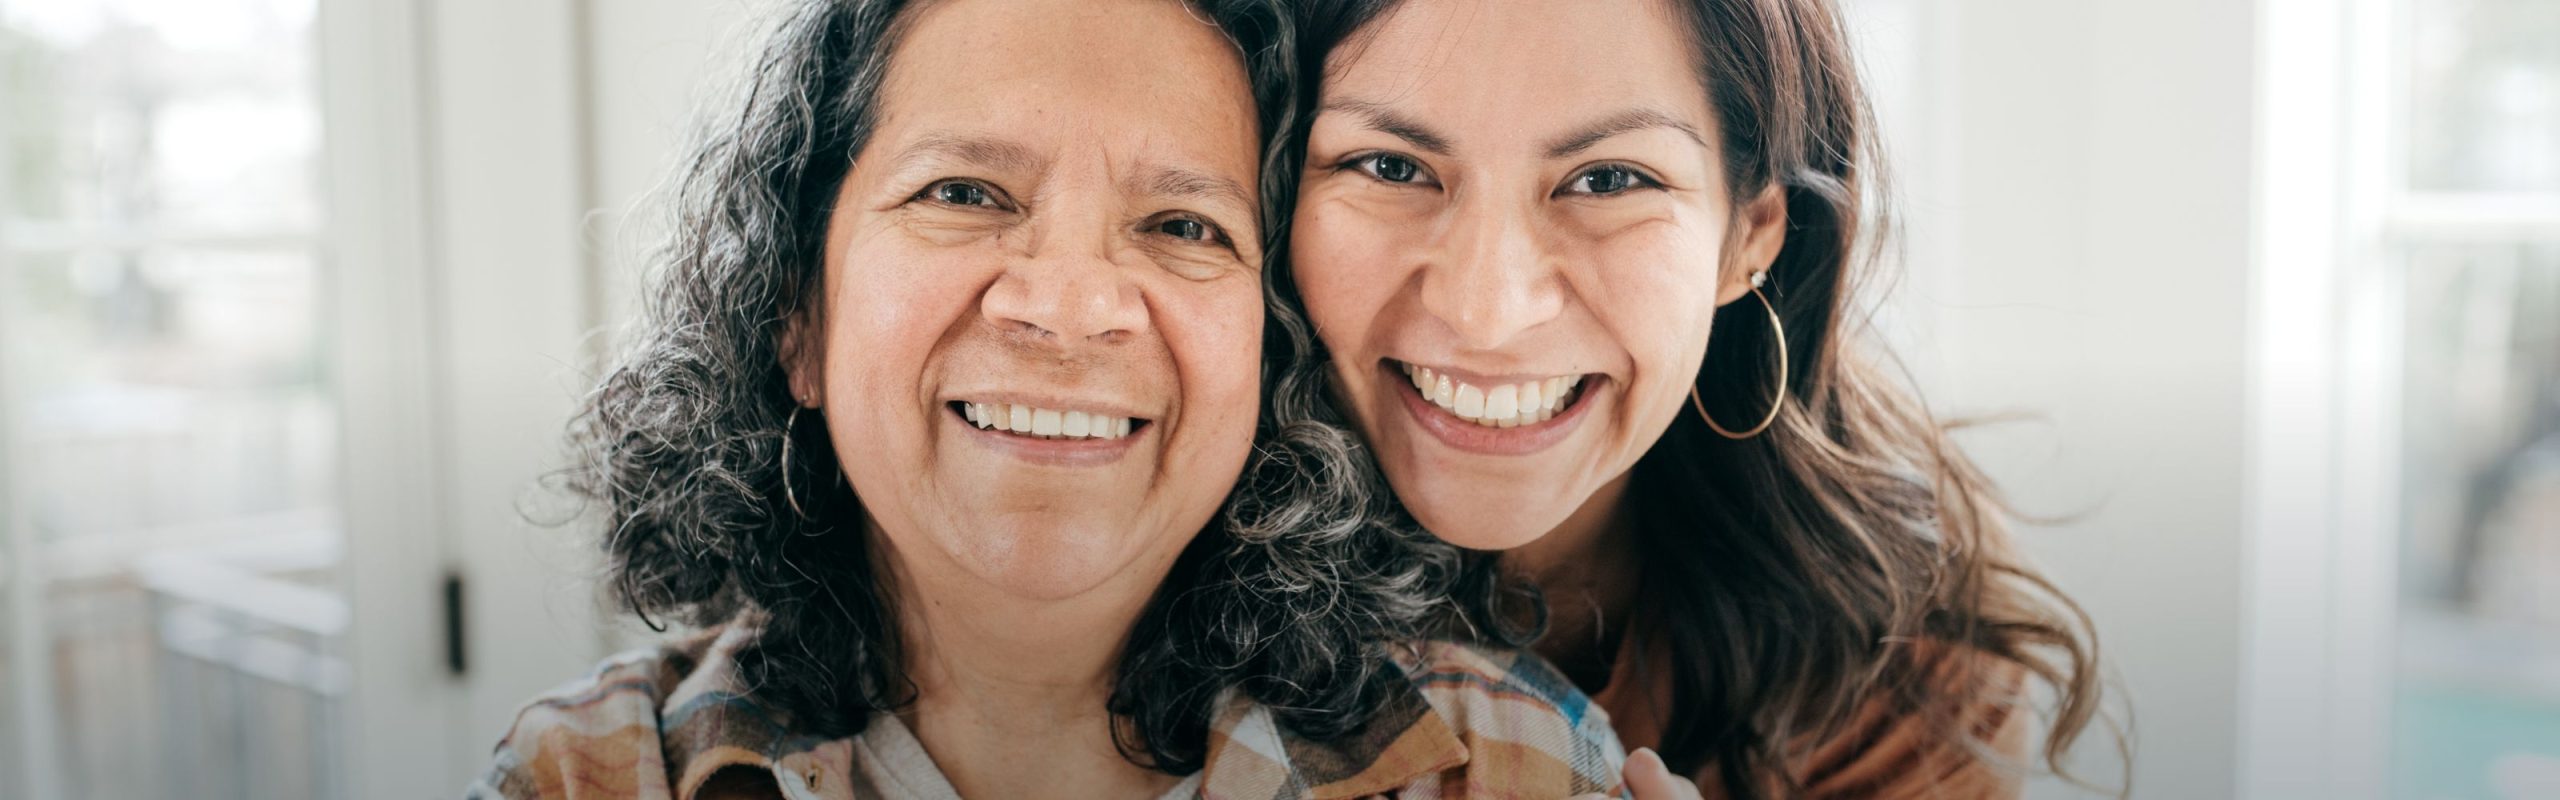 Adult woman smiles with her mother